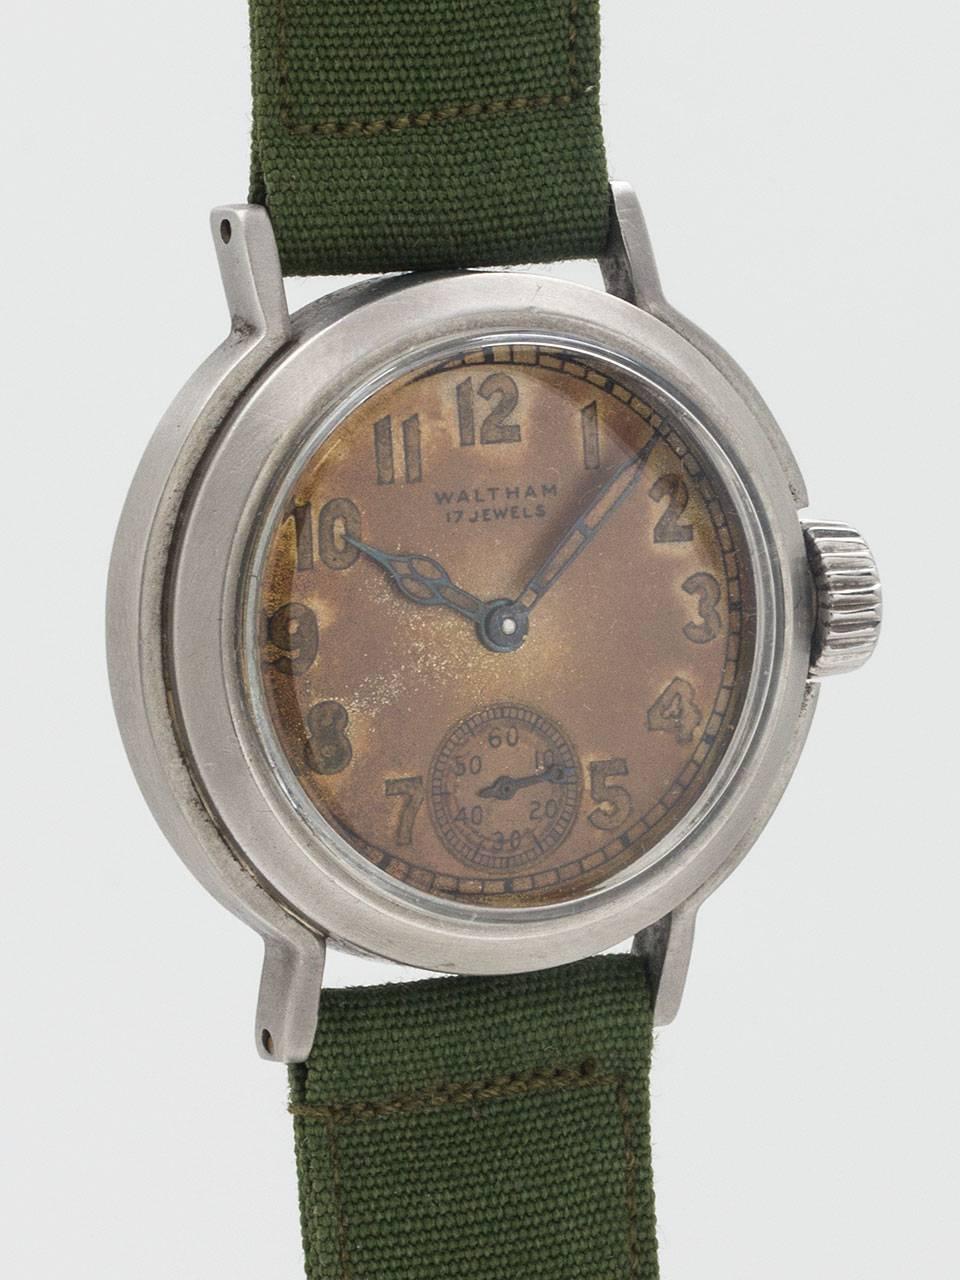 Waltham Premier U.S. Military WWII Era Wristwatch. Brushed metal non reflective case with distinctive design, measuring 33 x 37mm. Fantastic patina’d original dial with printed Arabic numeral luminous and hands. Powered by manual wind 17 jewels